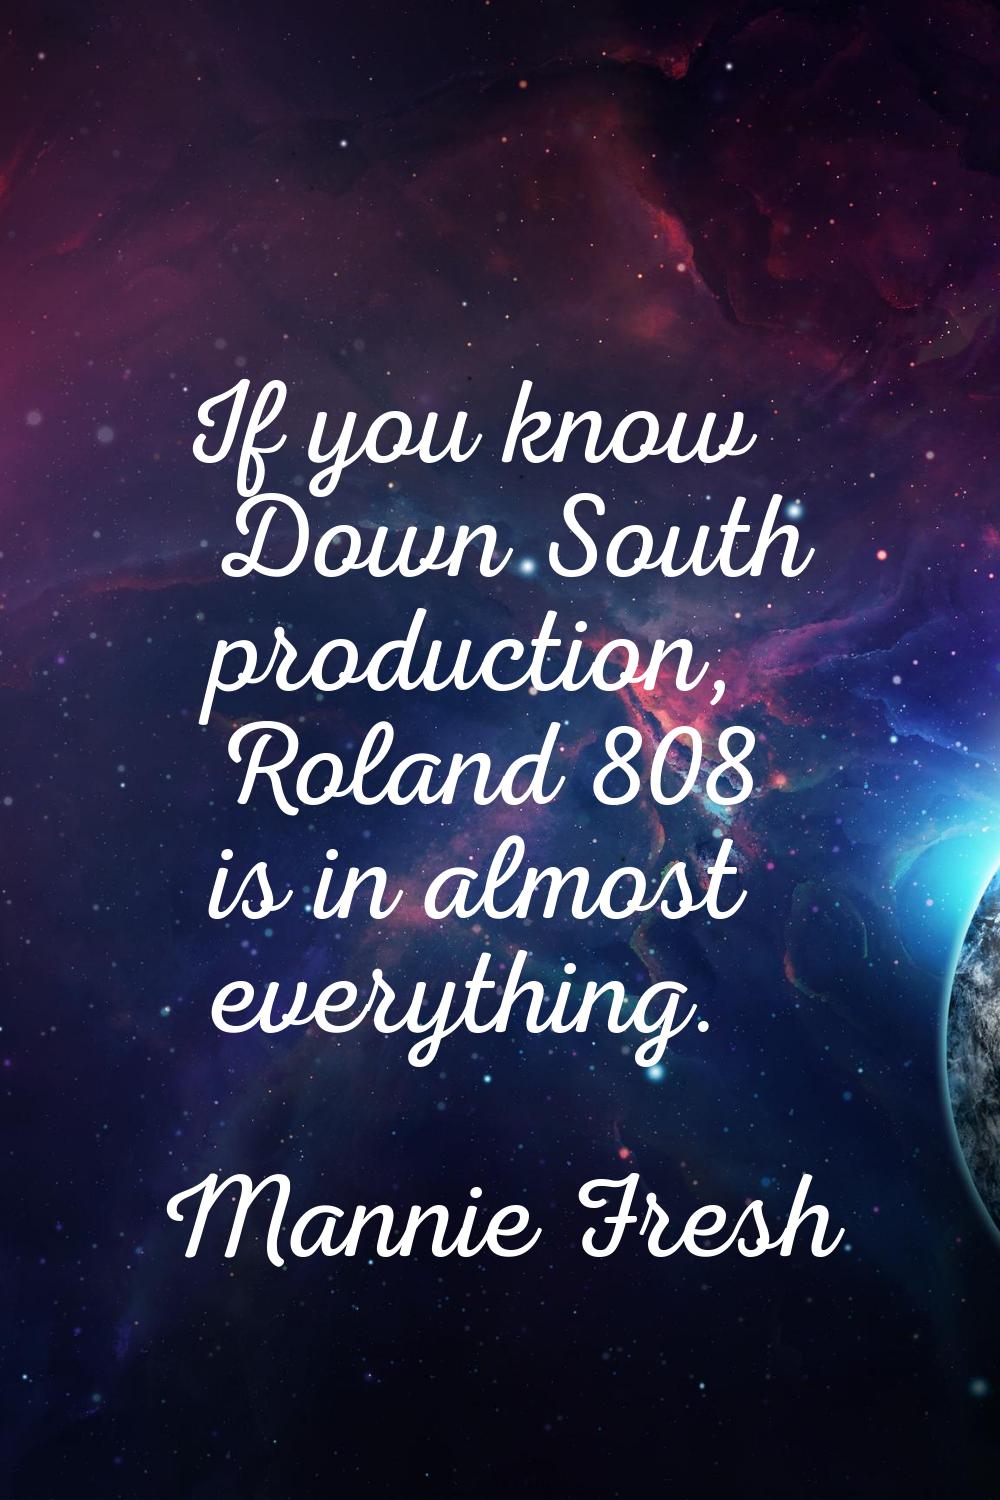 If you know Down South production, Roland 808 is in almost everything.